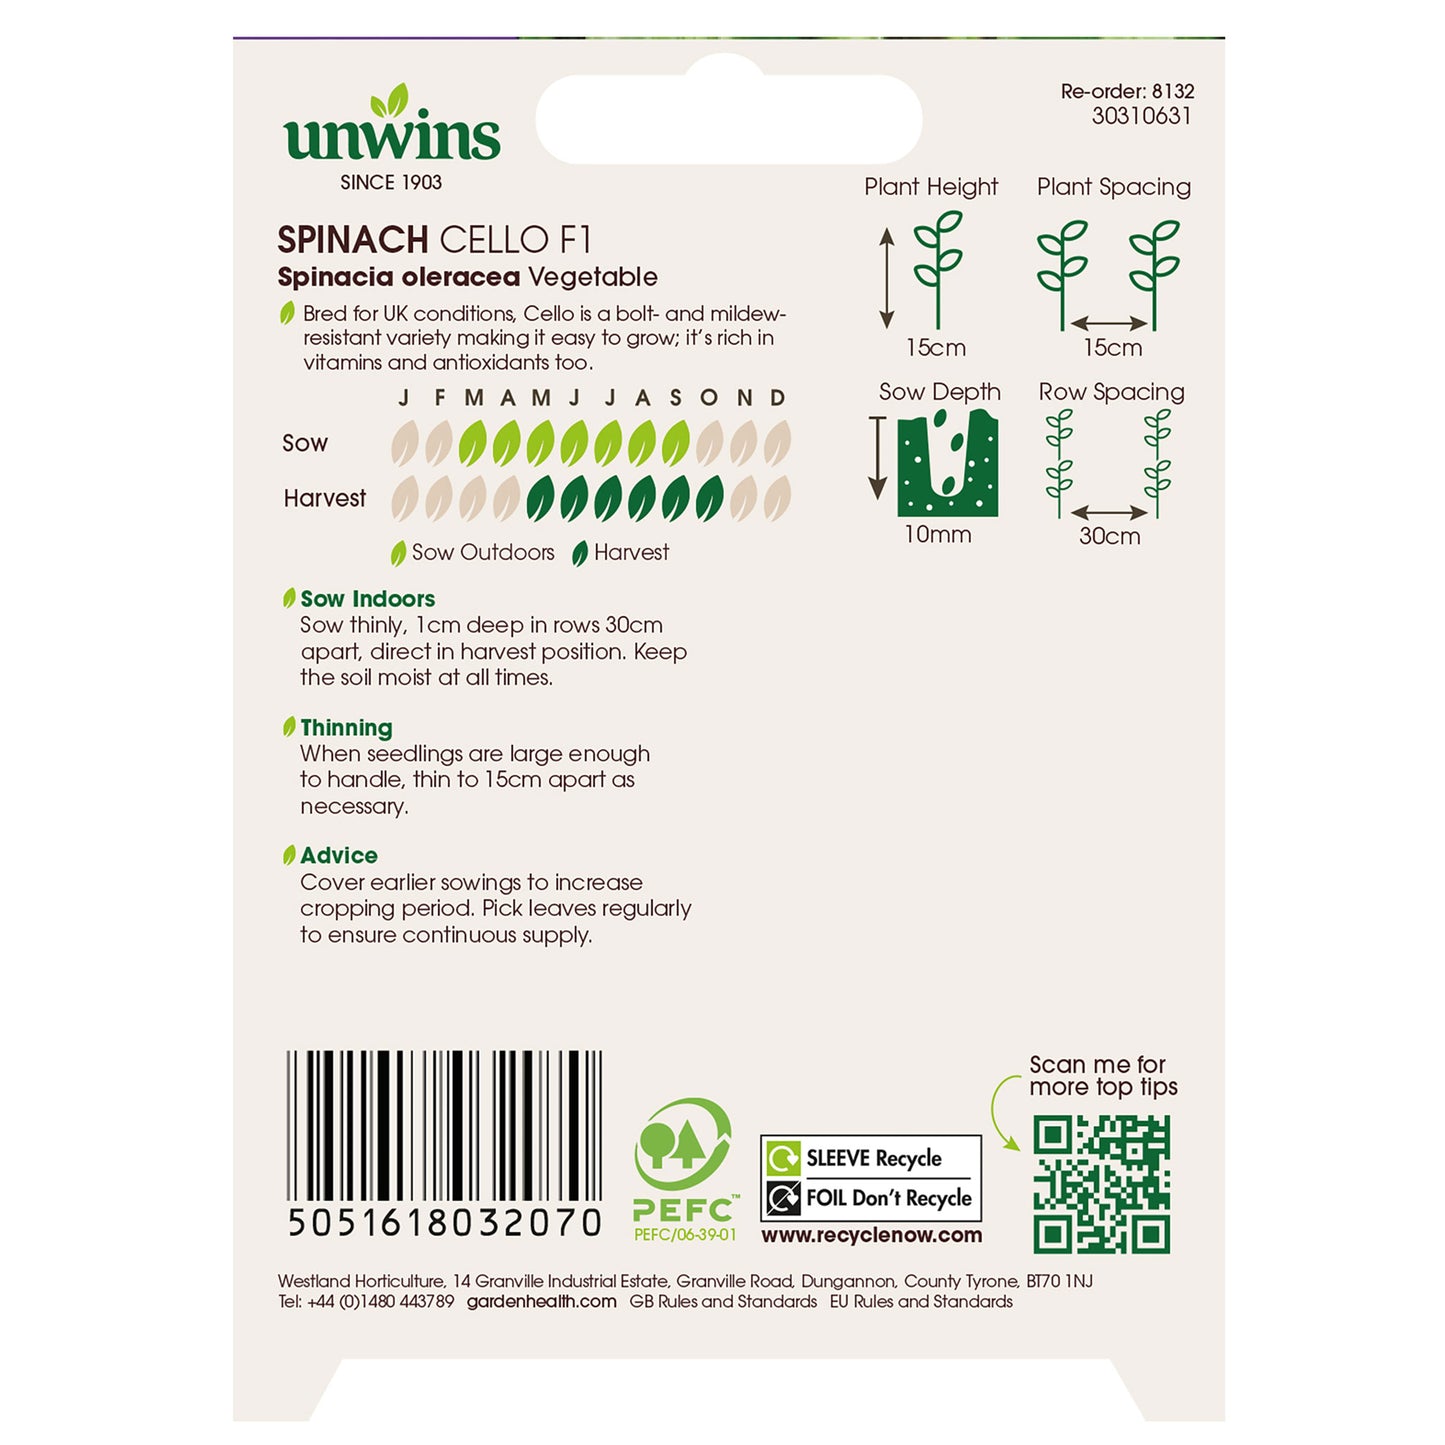 Unwins Spinach Cello F1 Seeds back of pack